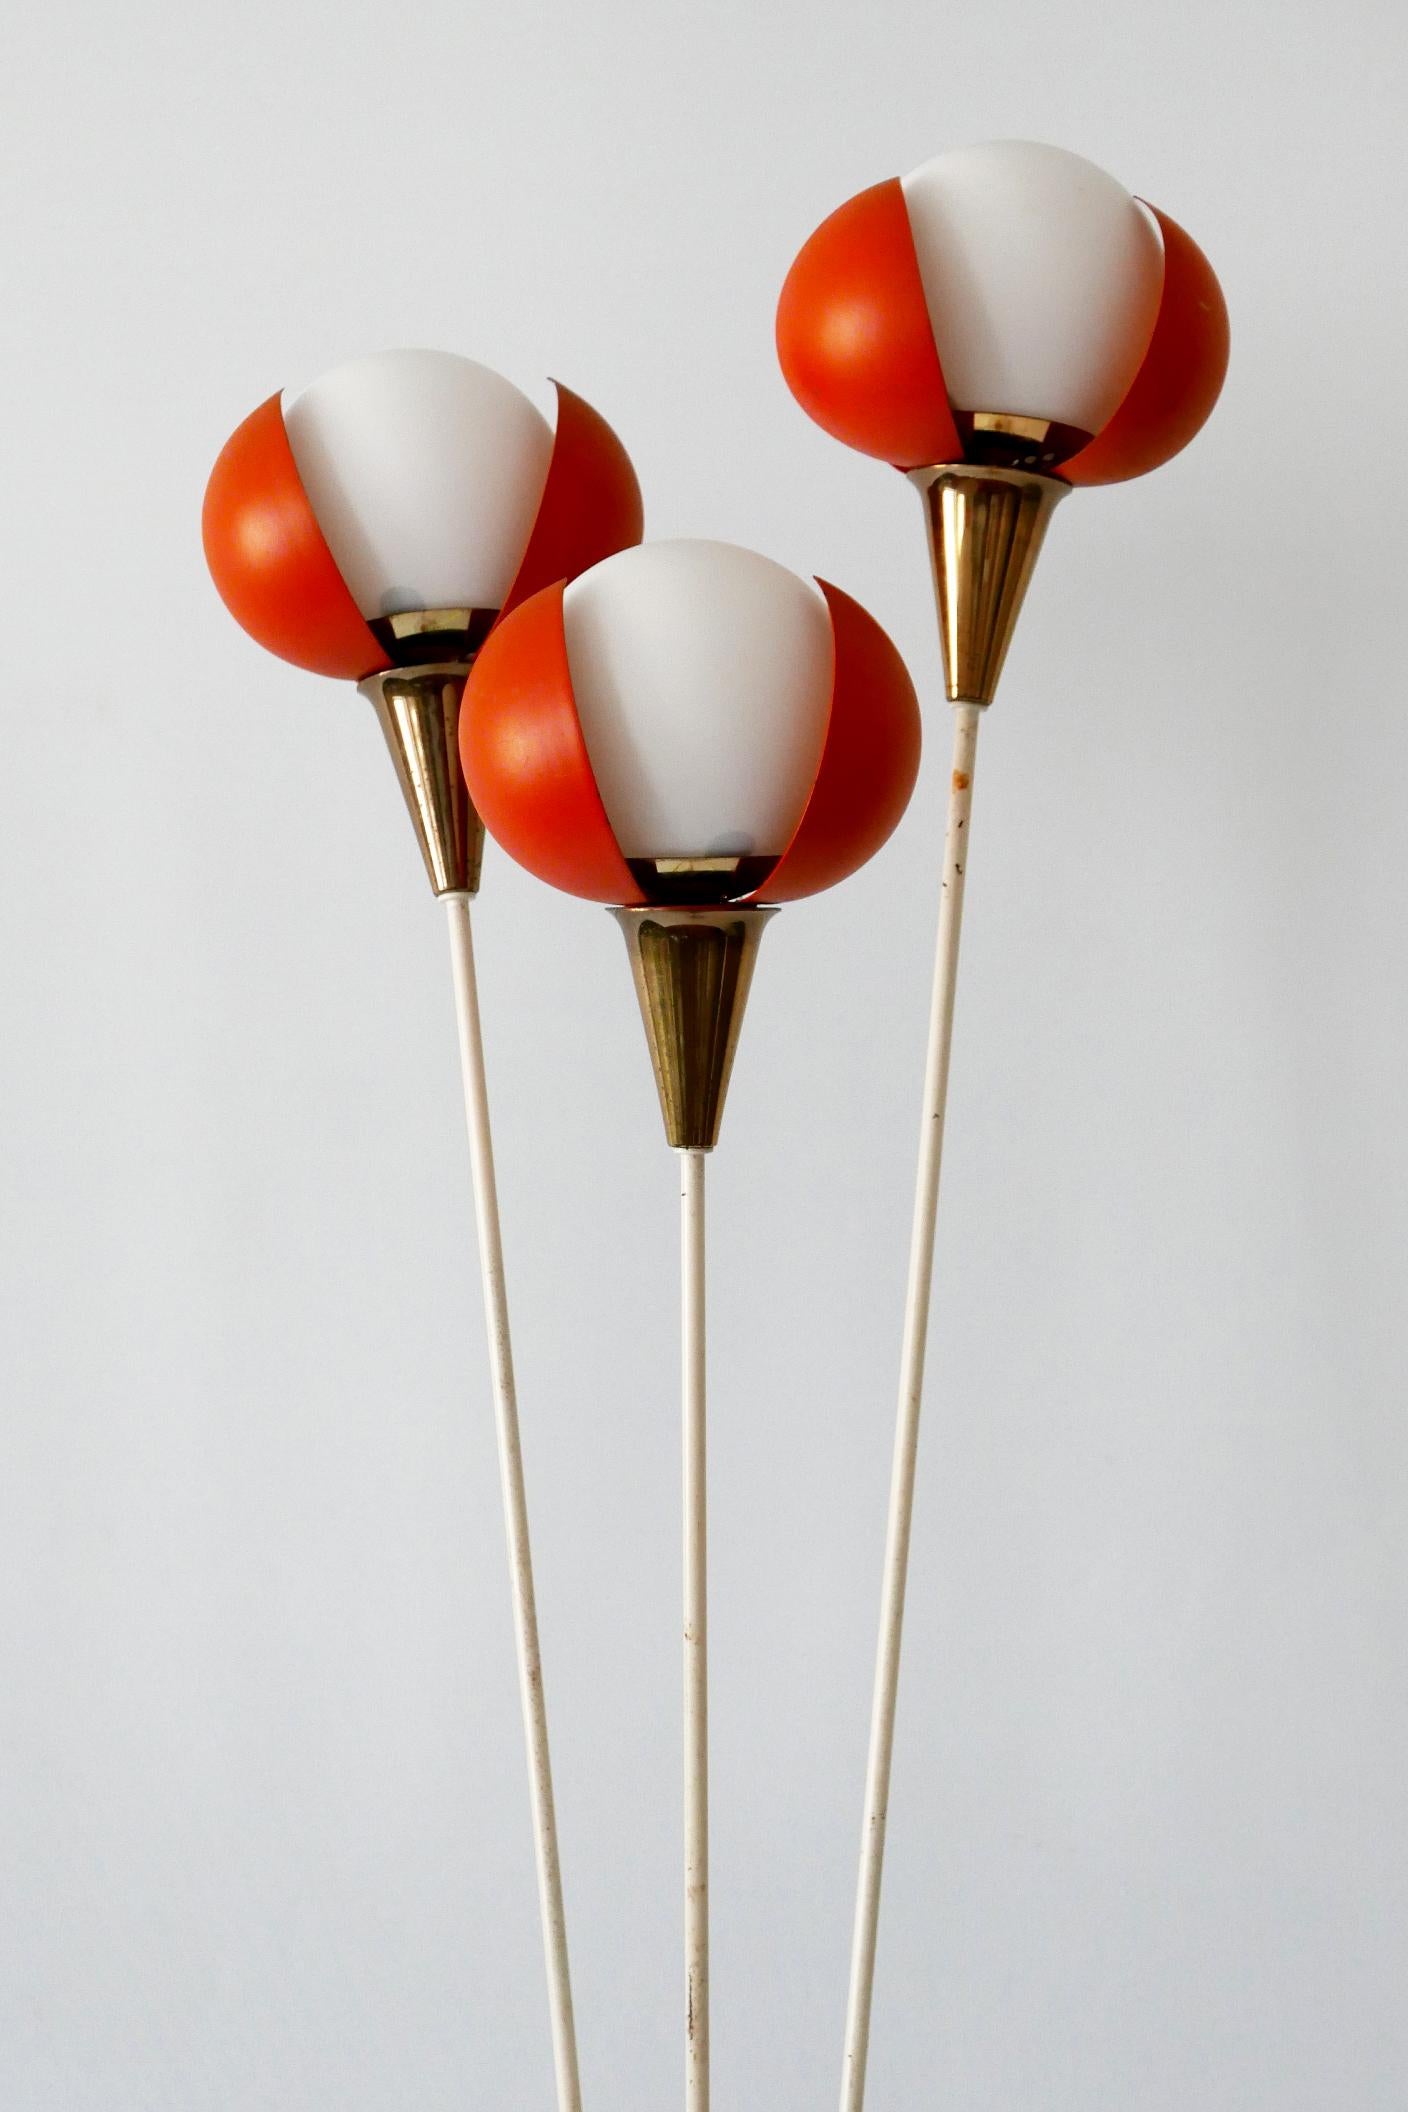 Amazing Mid-Century Modern Three-Flamed Floor Lamp Buds, 1950s, France For Sale 1